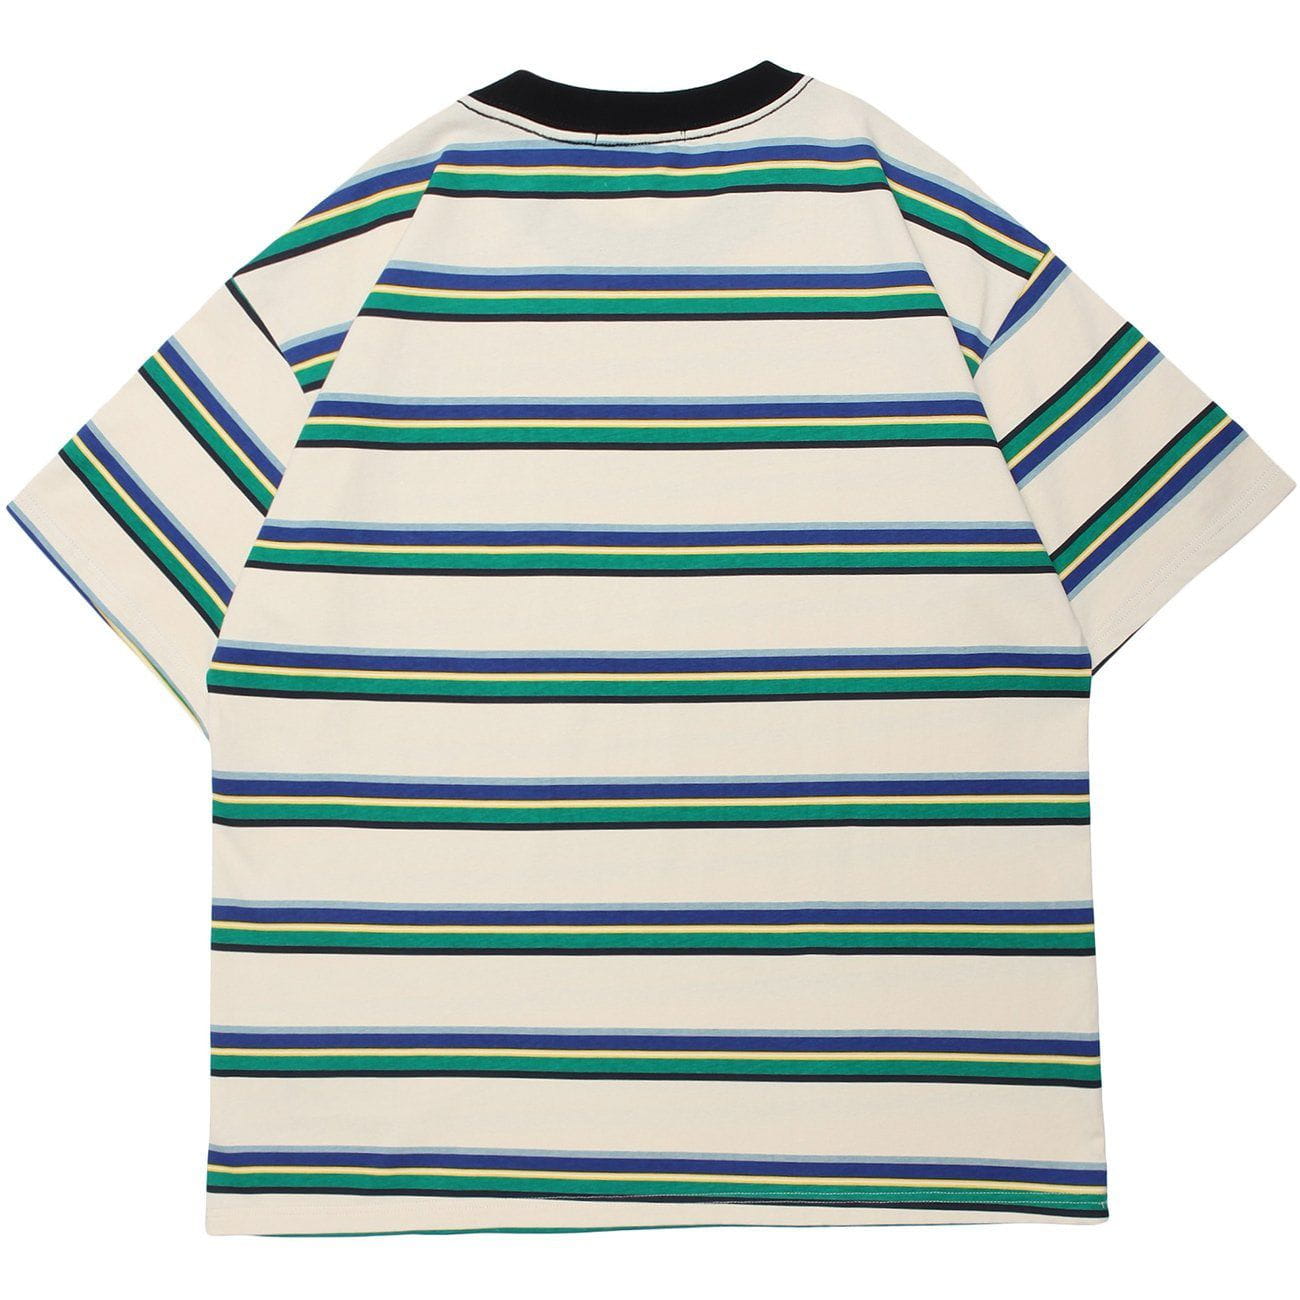 Striped Bright Color Matching T-Shirt